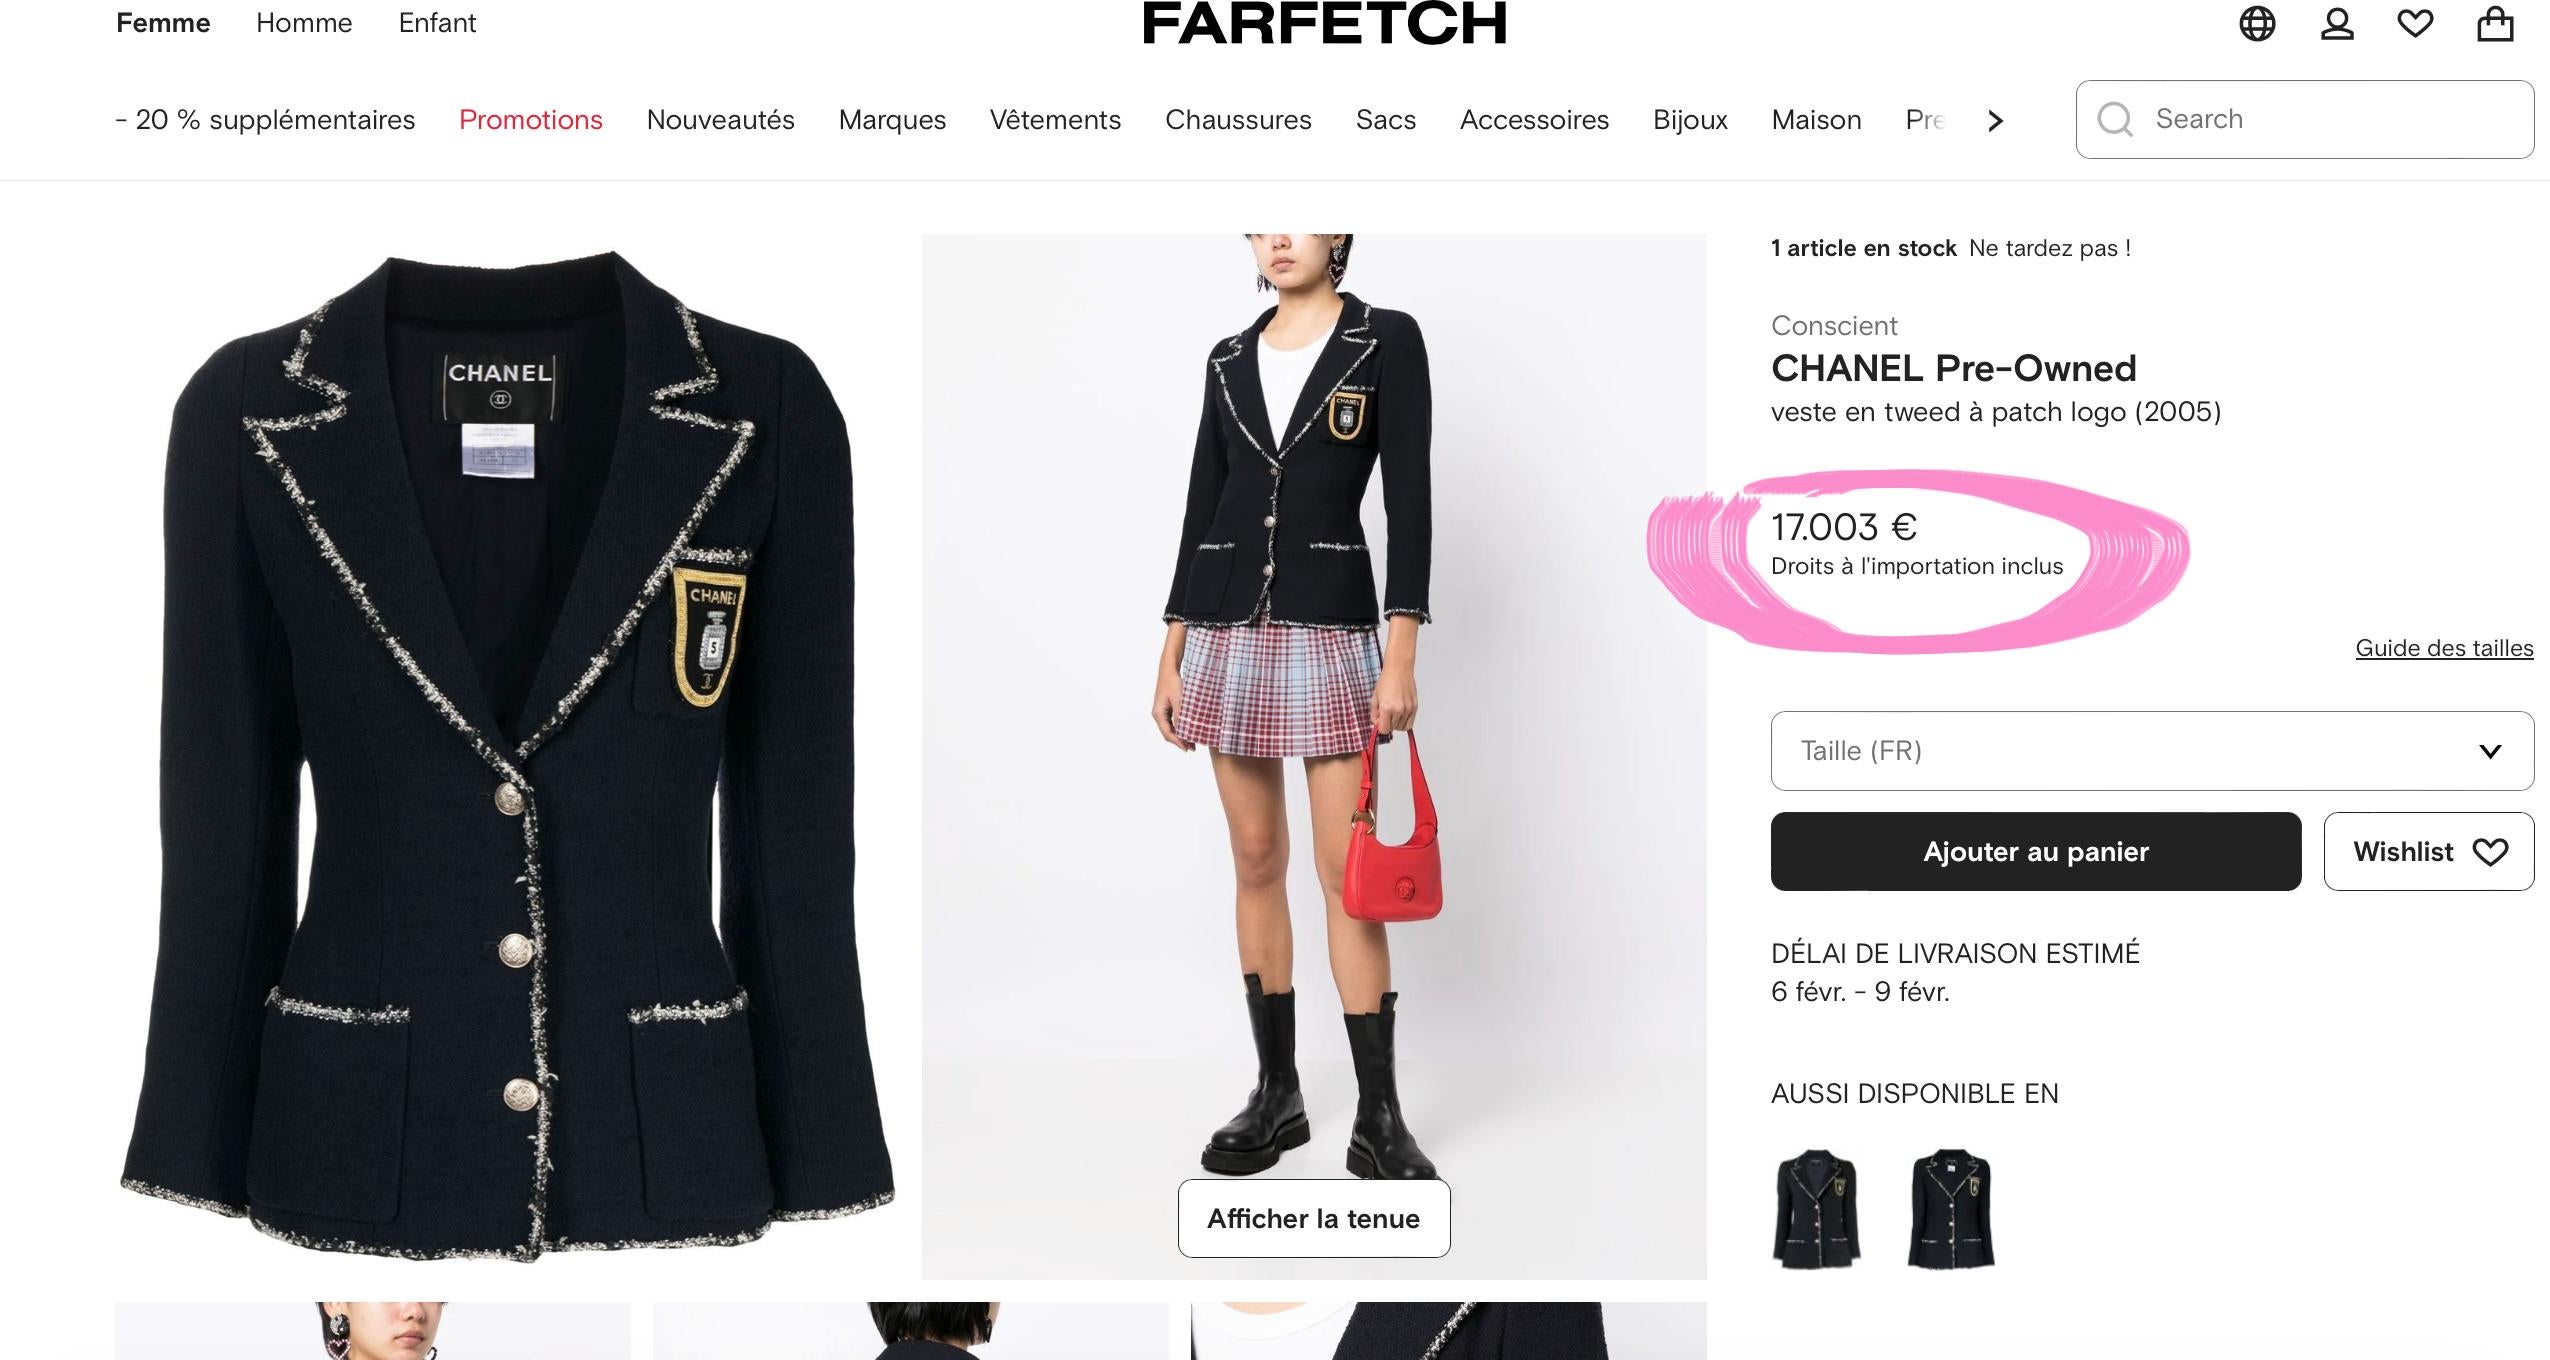 Please, price is not negotiable
The most hunted after Chanel black tweed jacket with CC Logo Patch -- as seen in Devil Wears Prada movie!
- Price on farfetch over 17,000€ for a pre-owned item
- from 2005 Cruise Collection, 05C
- CC logo silver tone